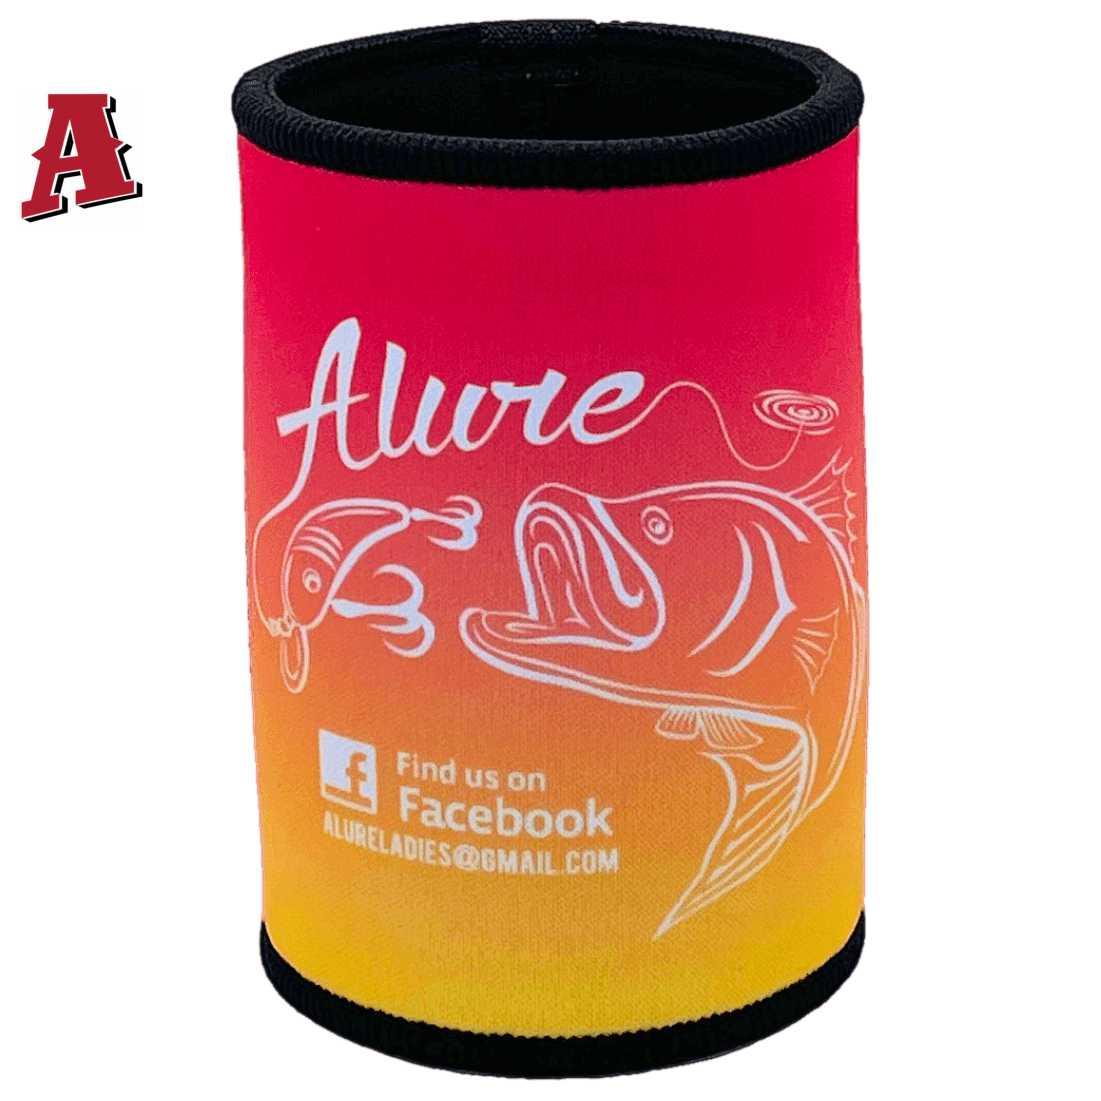 Alure Ladies Fishing Classic Timber Creek NT Custom Stubby Holder 5mm Neoprene with Stitched Seams Top Bottom Graduated Pink to Gold